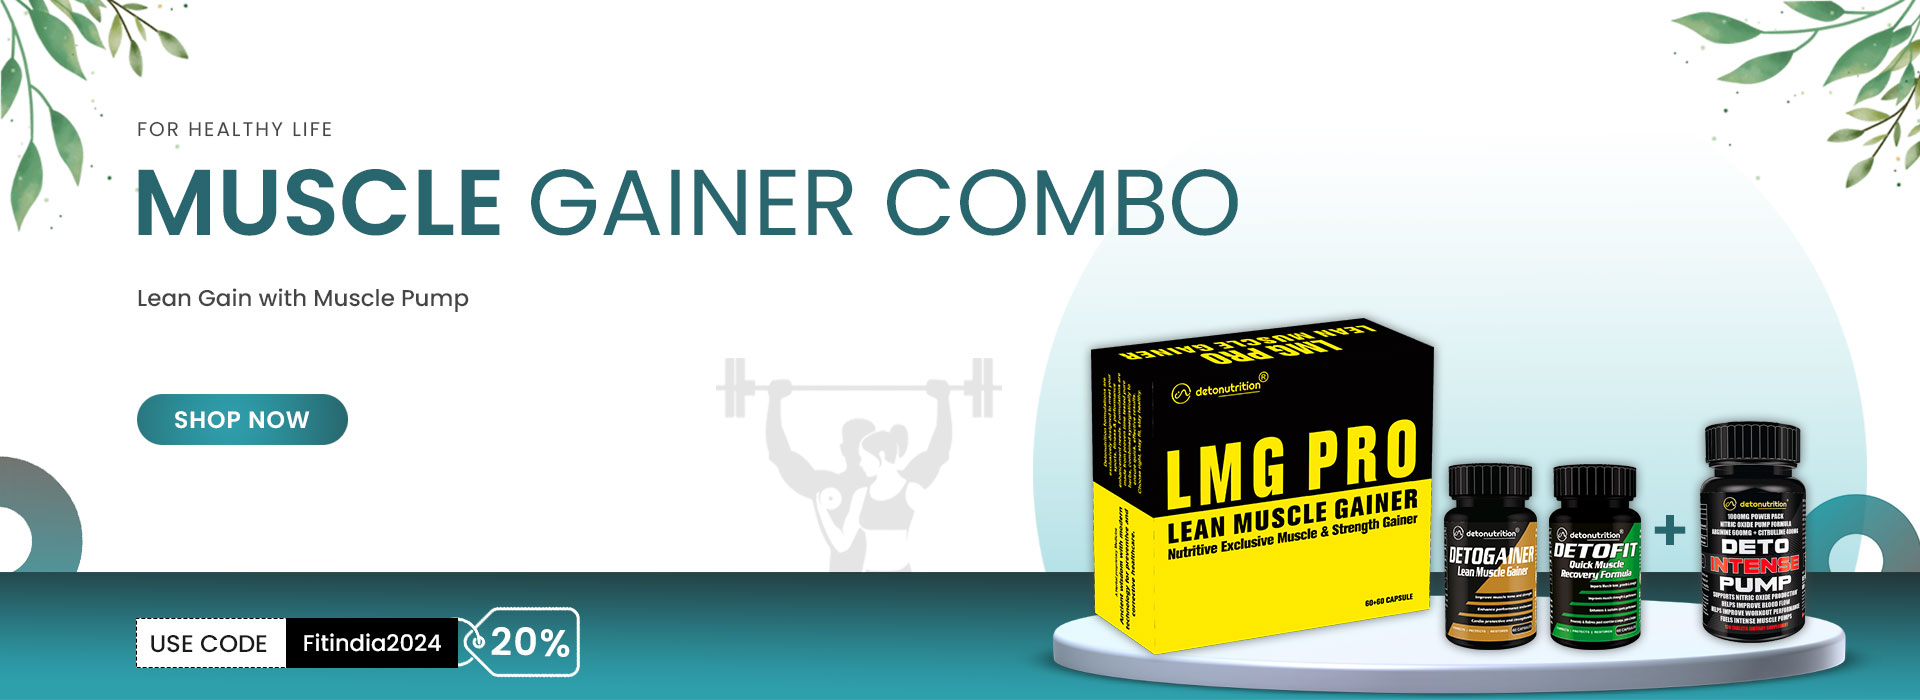 Muscle gainer combo